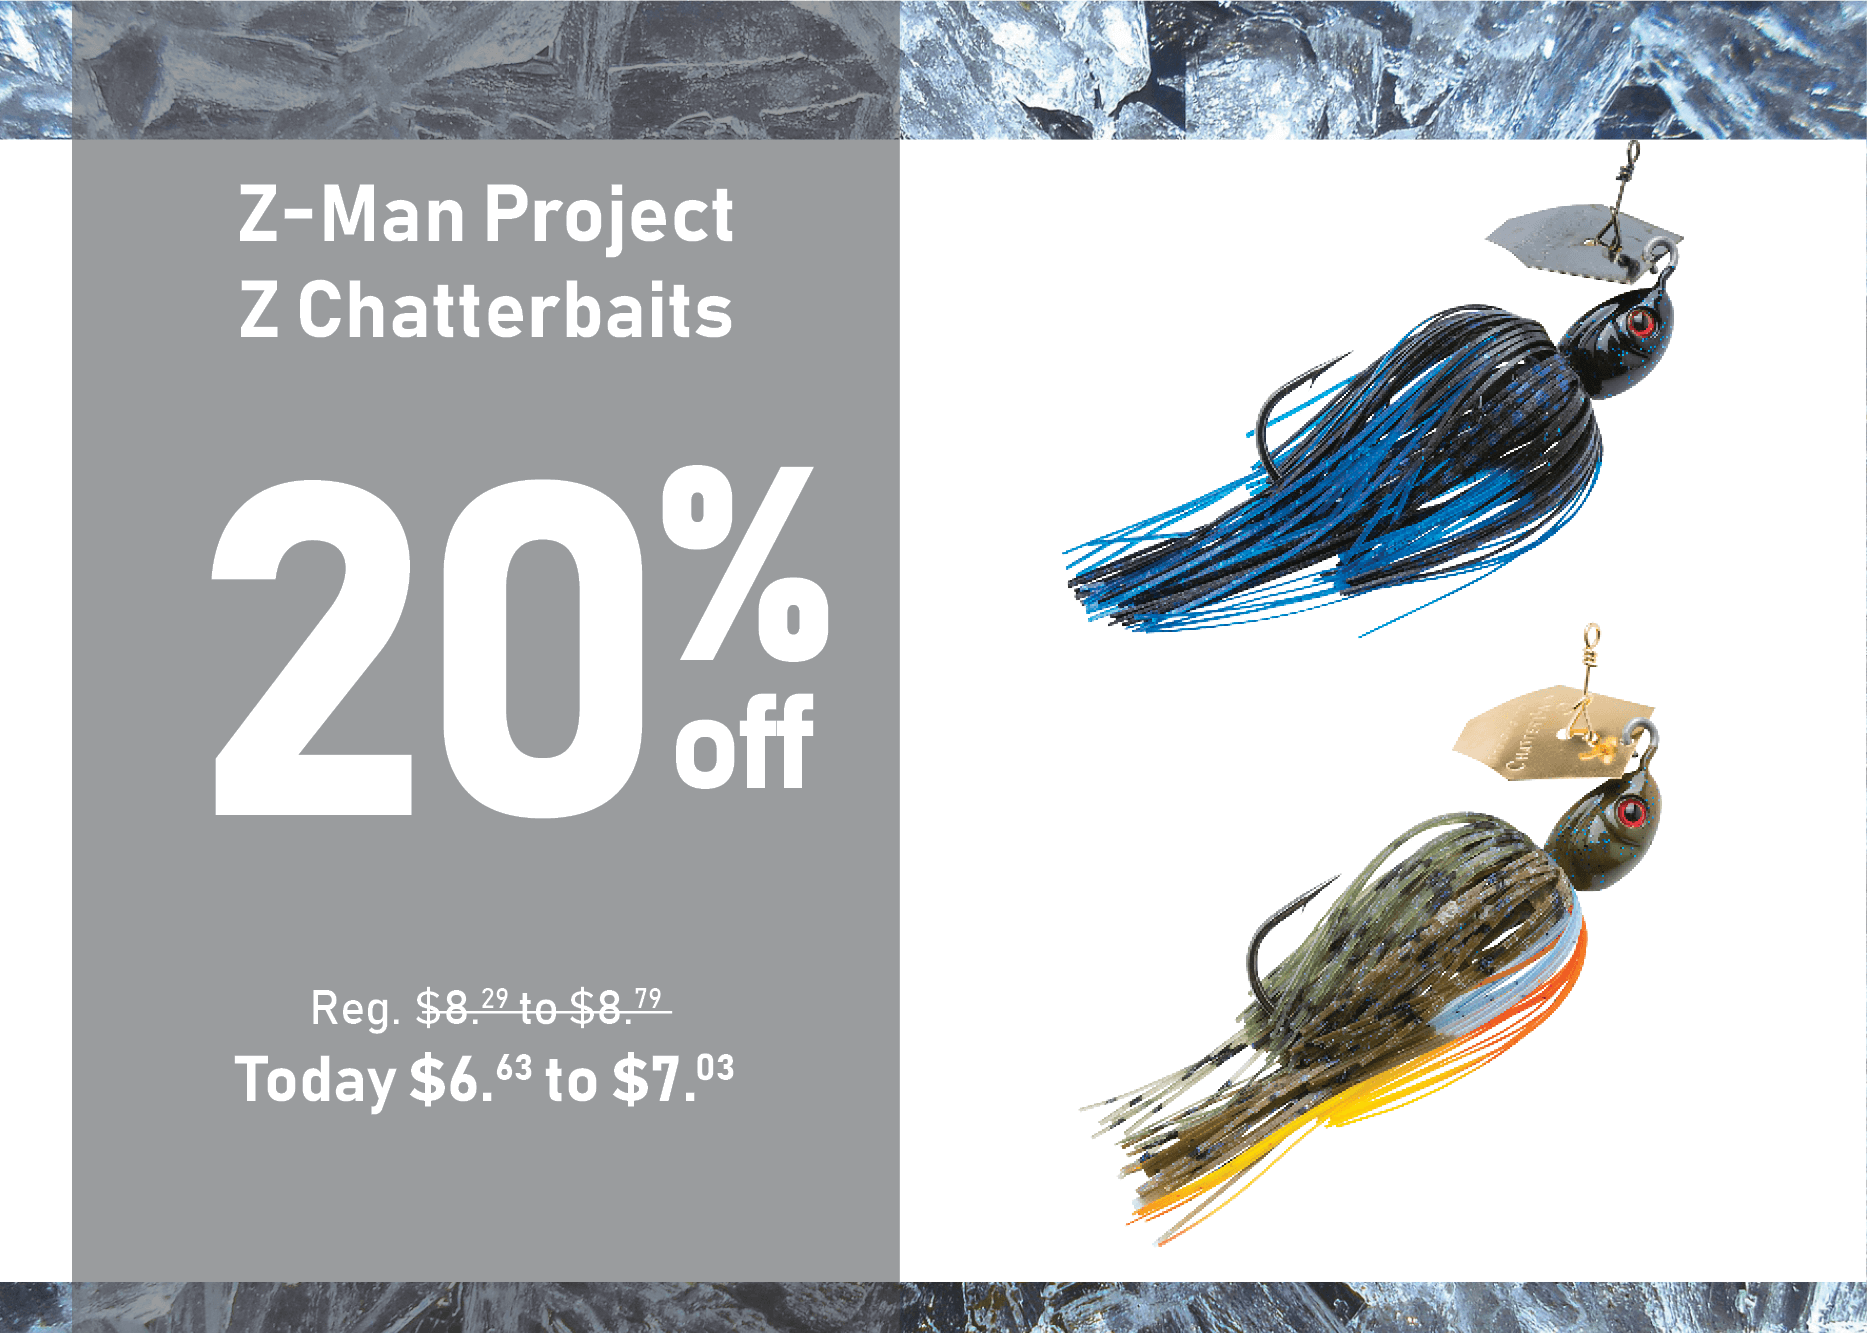 Save 15% on Z-Man Project Z Chatterbaits